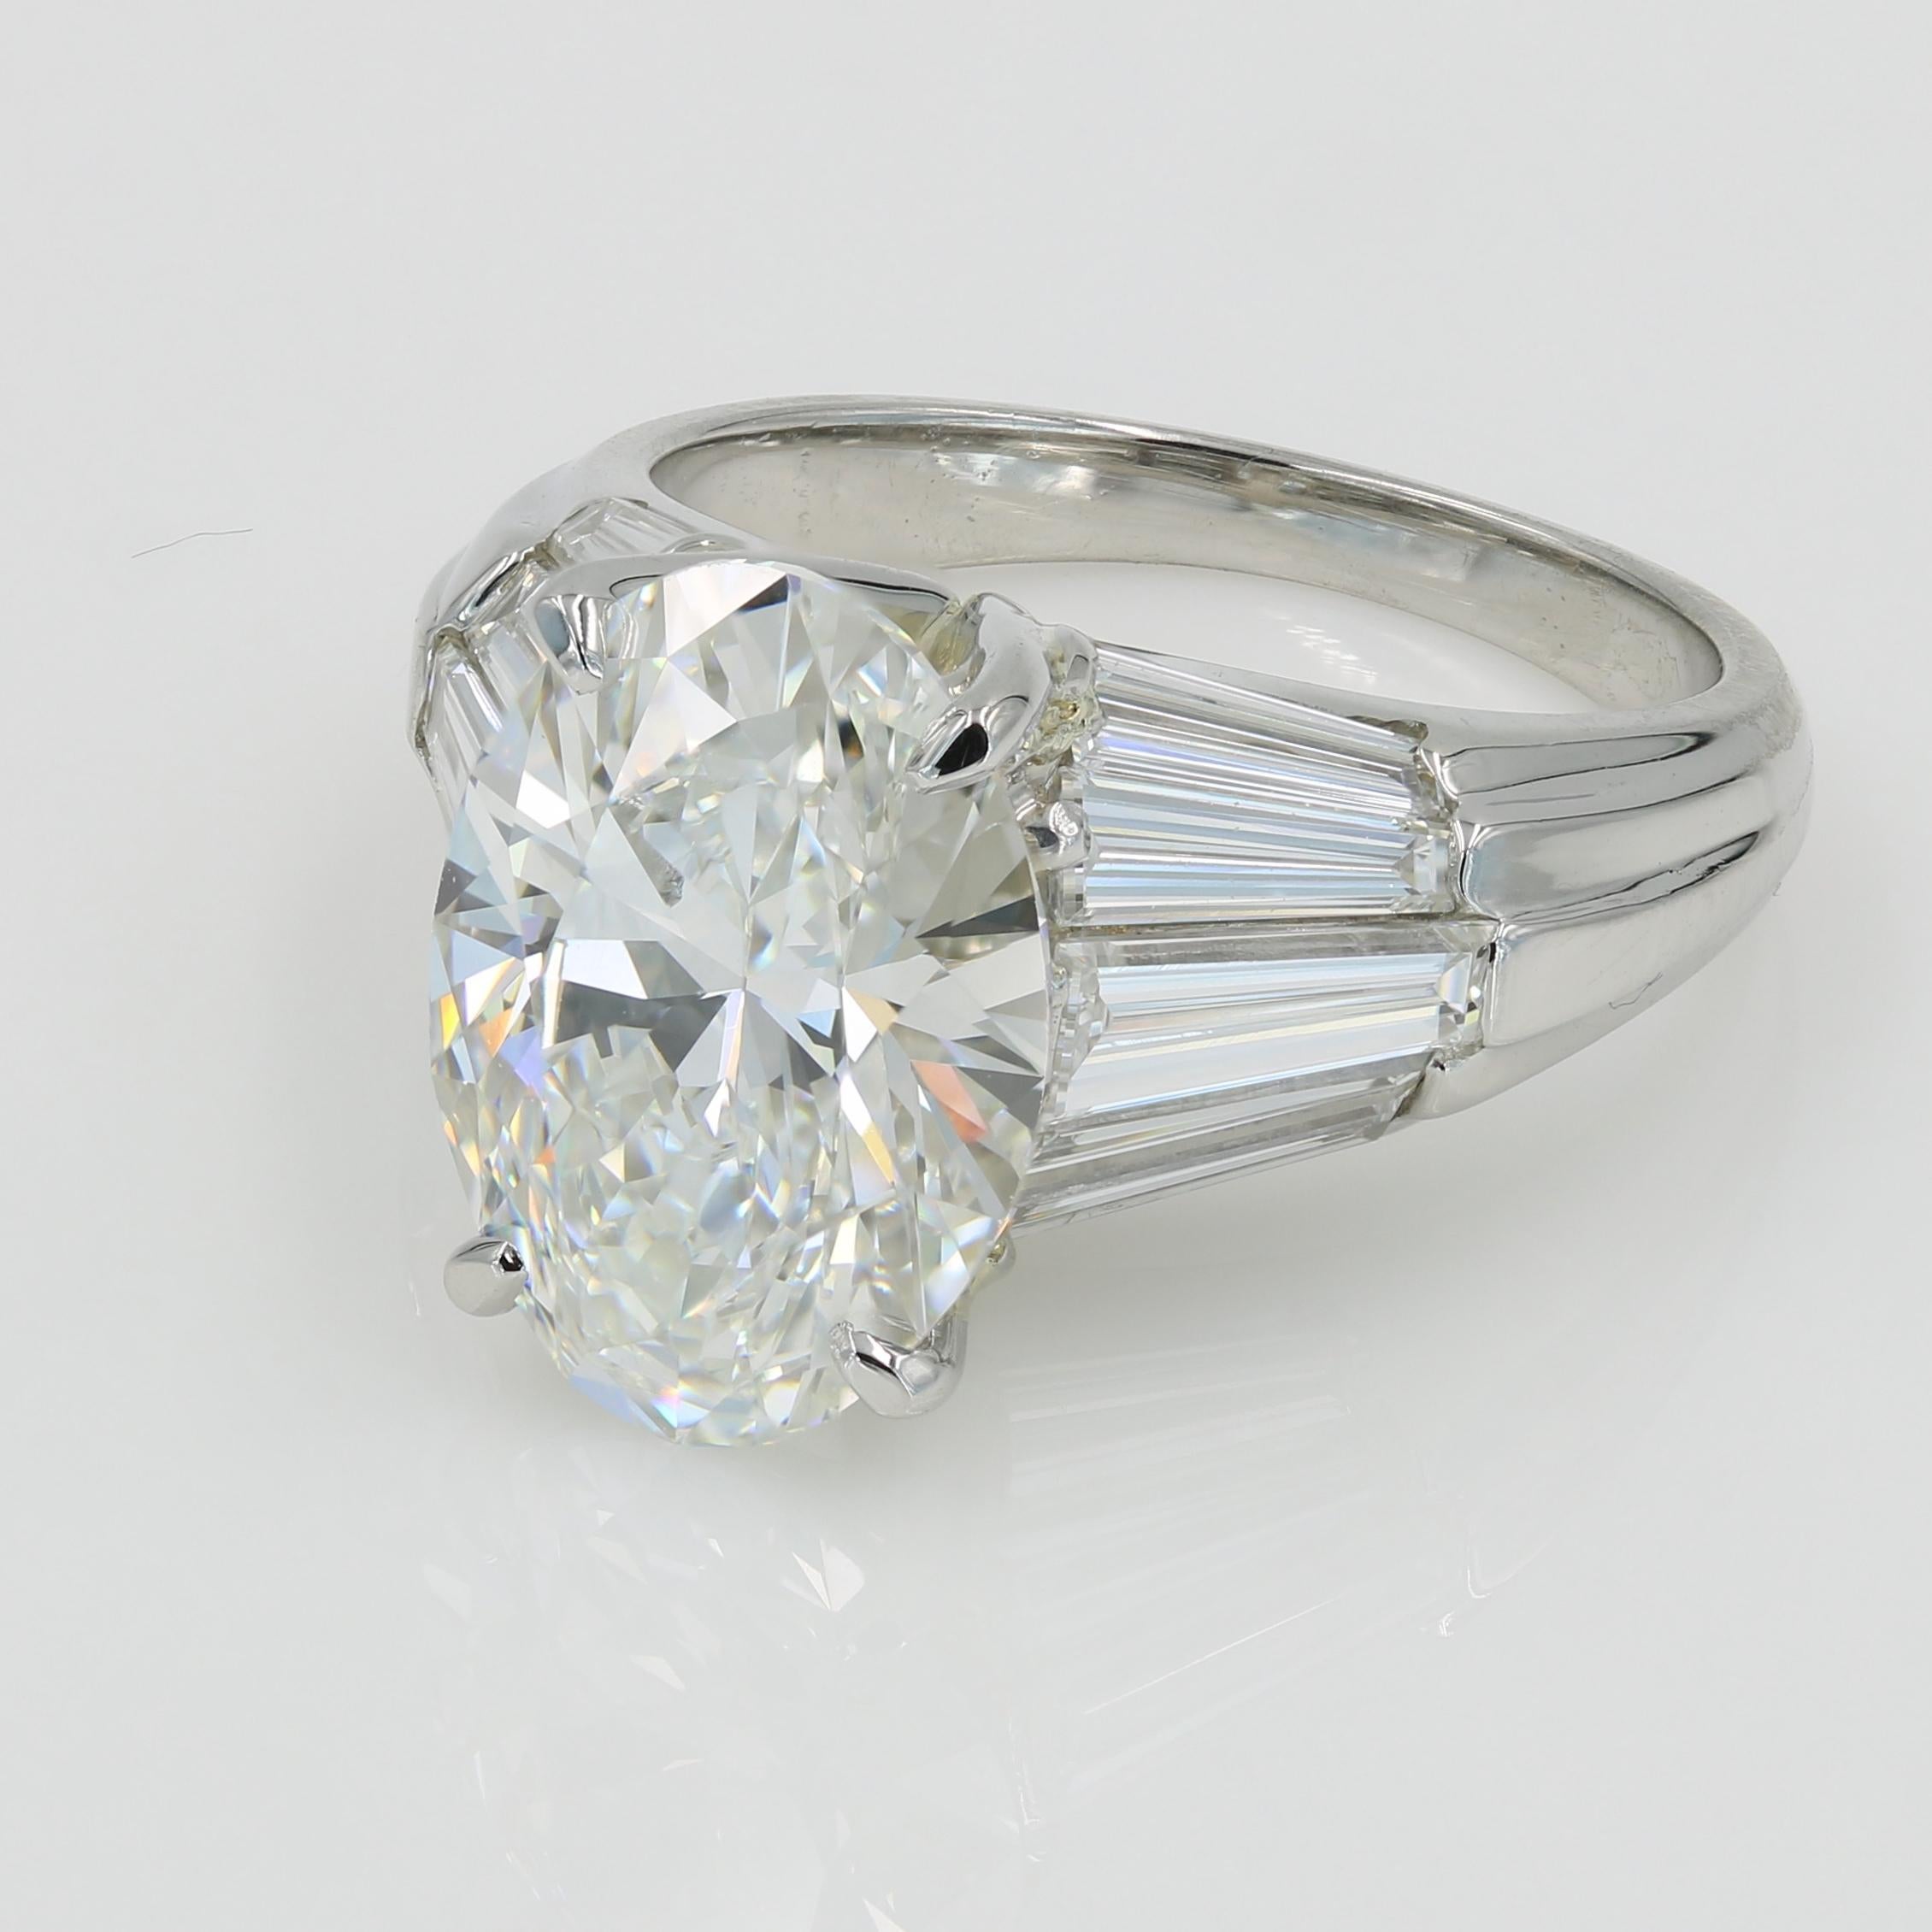 Contemporary Lester Lampert 5.05 Carat Oval Cut Diamond Ring, G / VS1 with GIA Papers in Plat